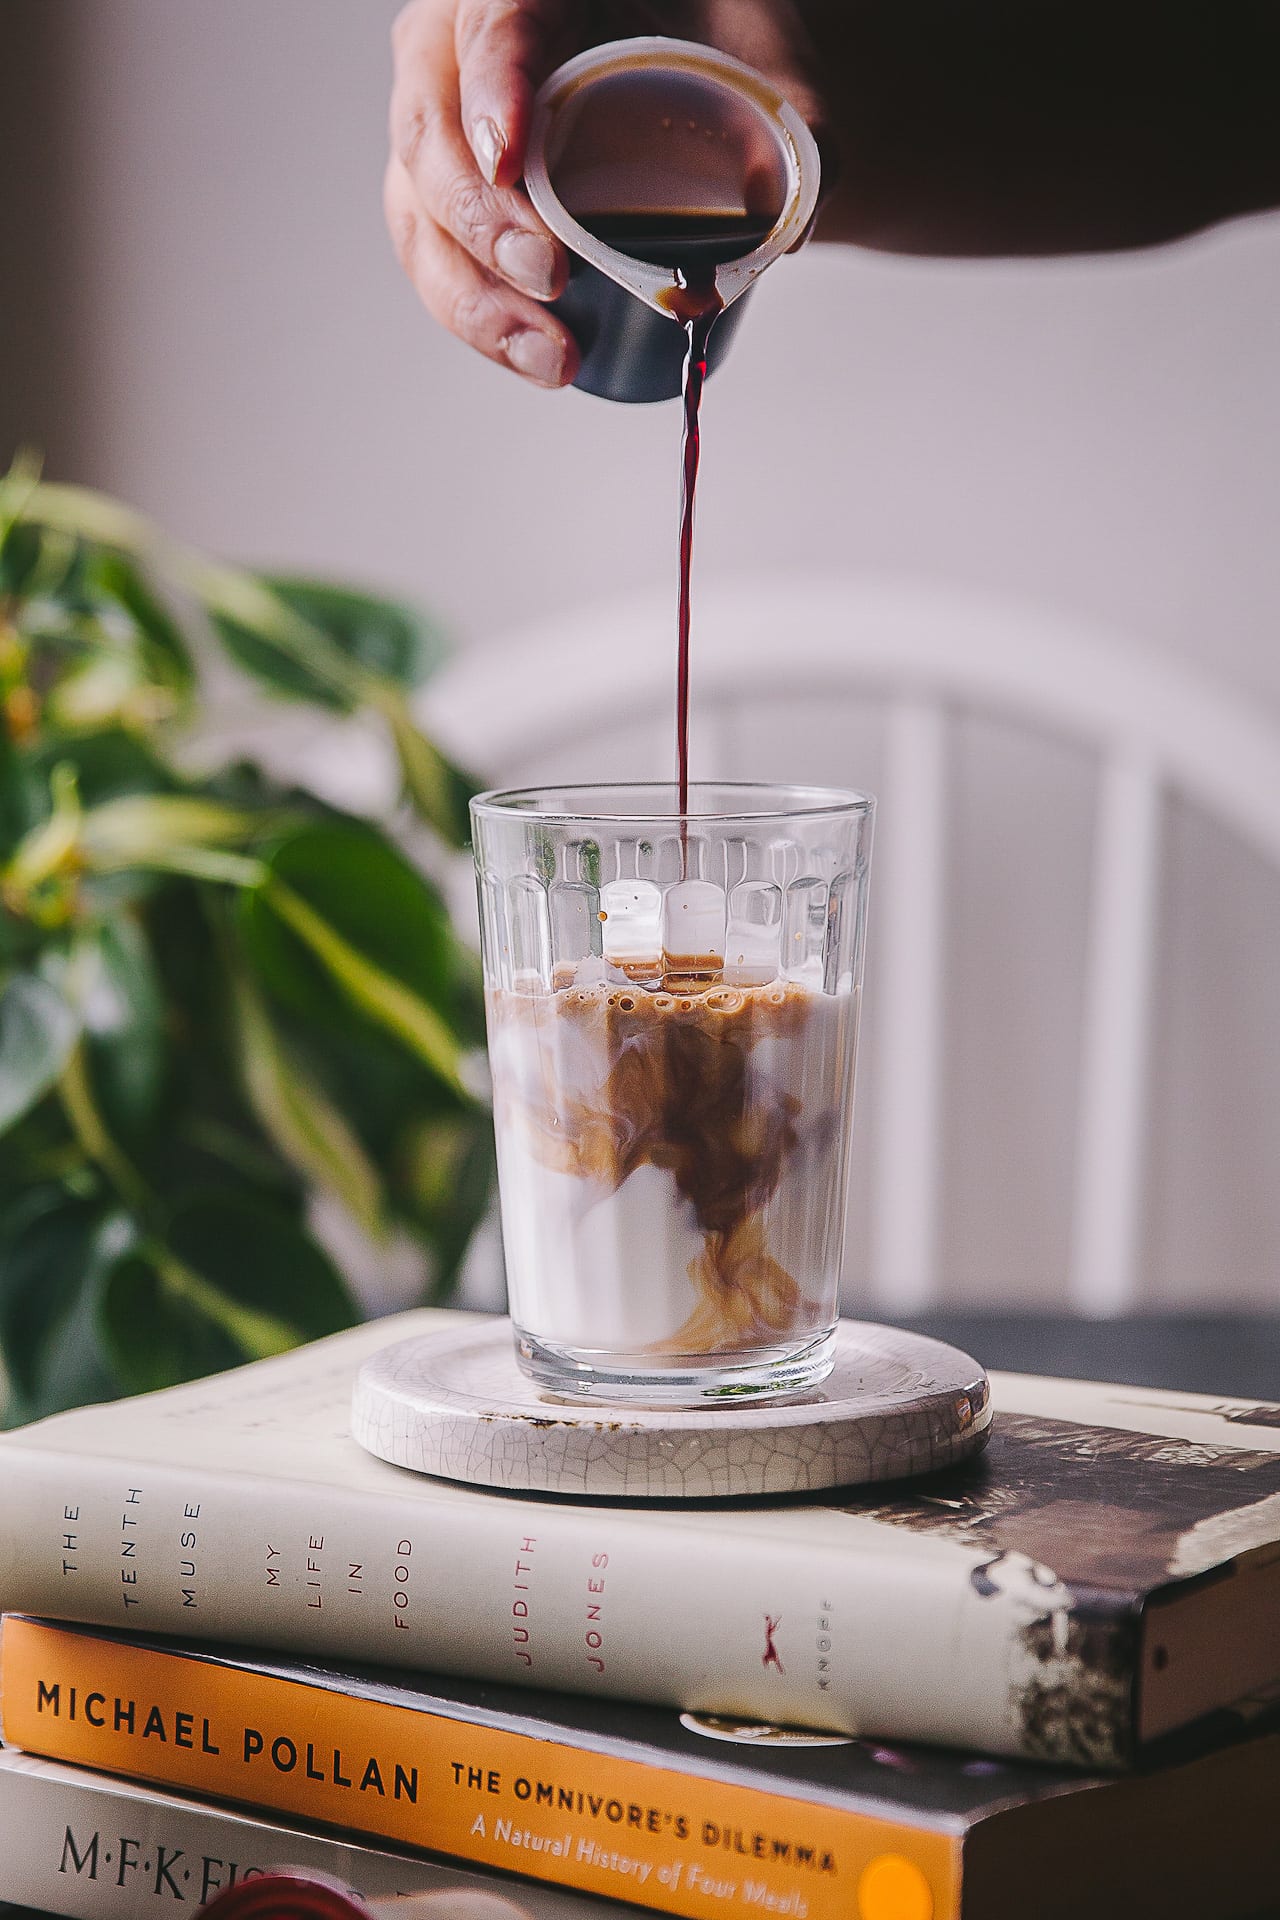 Cold Brew Coffee | Playful Cooking # cold #brew #coffee #javahouse #coffeeshot #photography